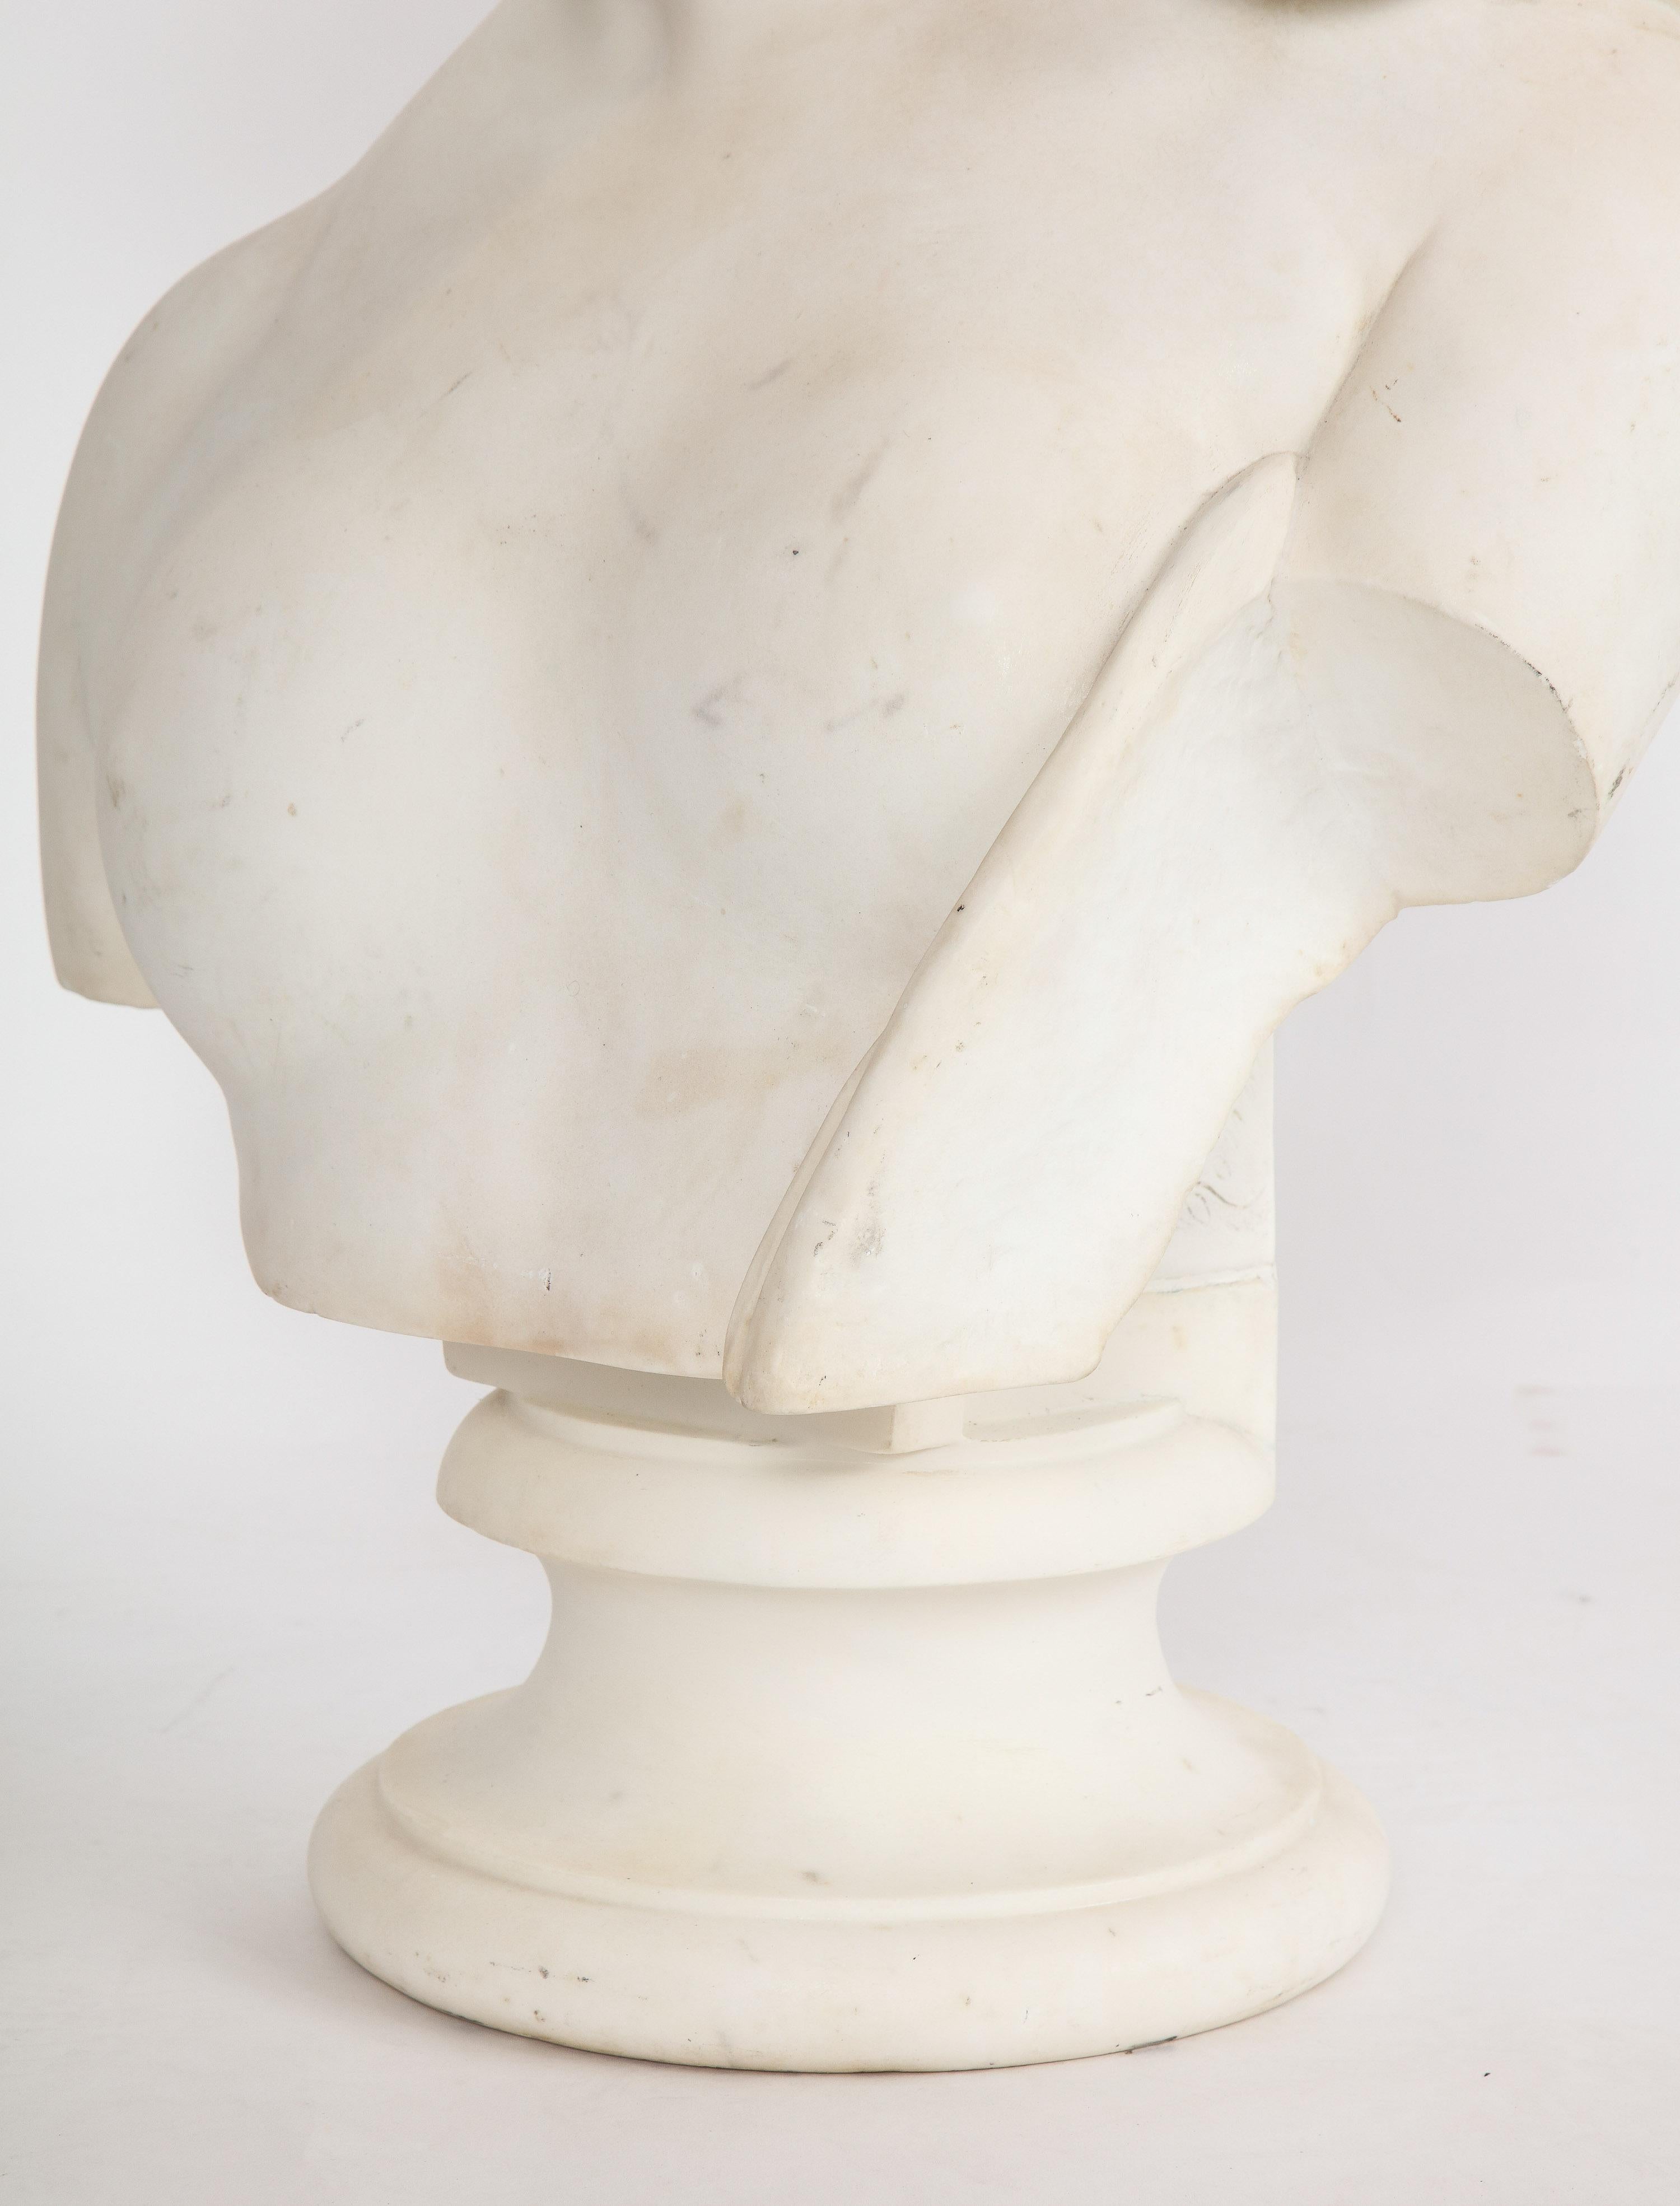 19th Century Antique Italian Neoclassical Marble Bust of Psyche, by Giuseppe Carnevale